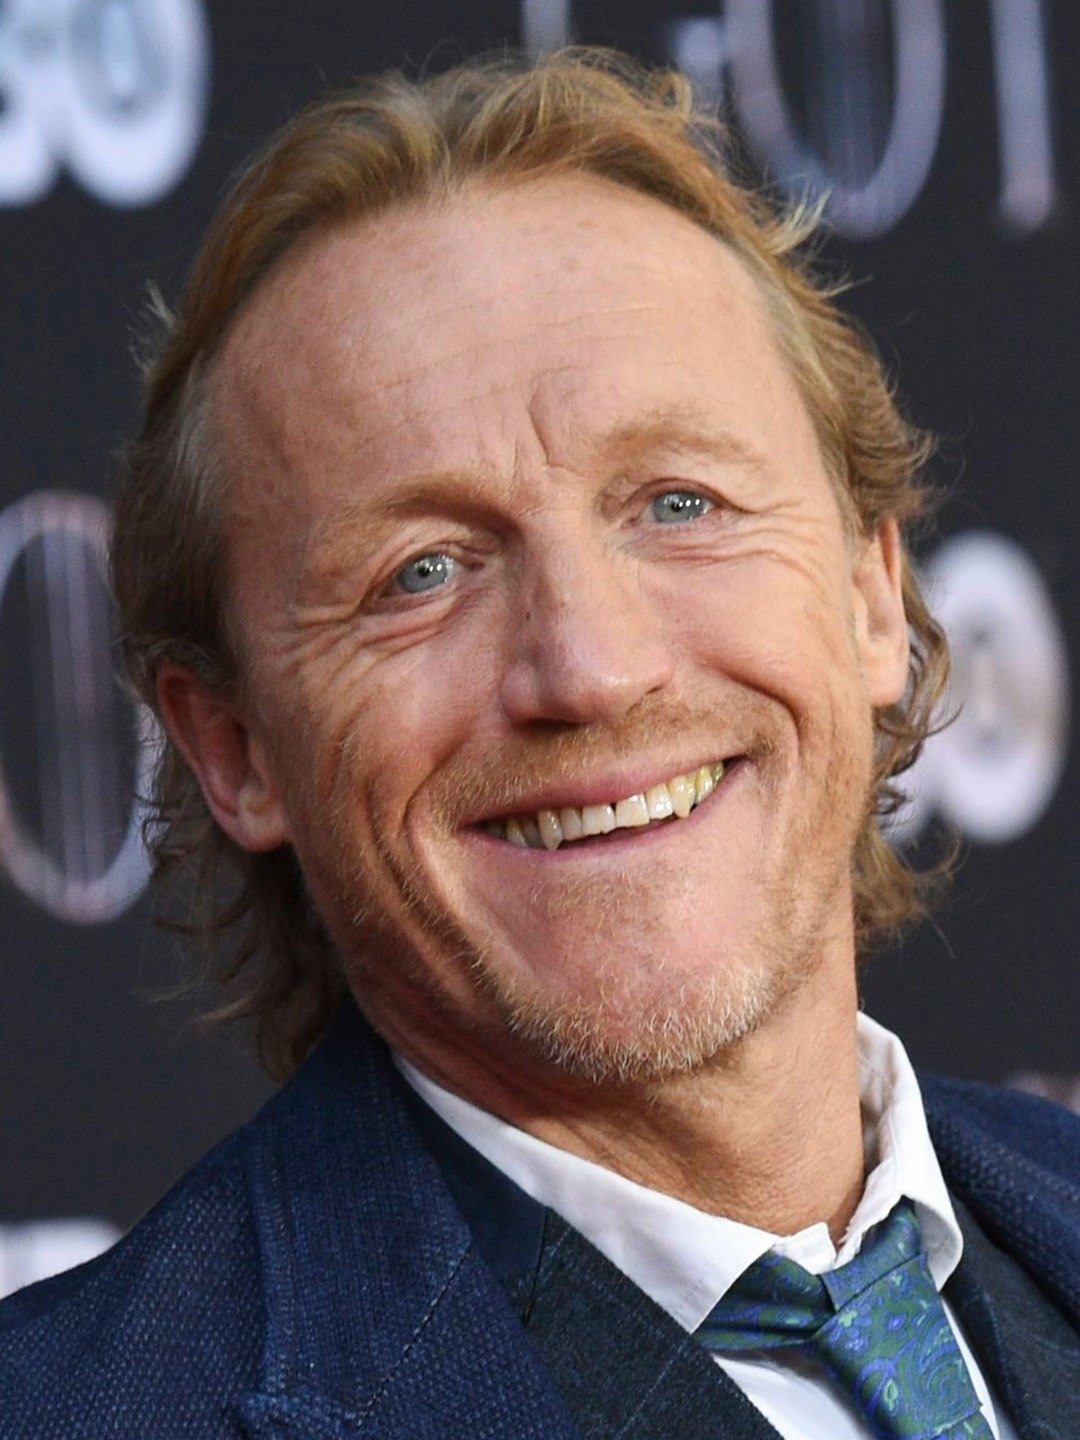 How tall is Jerome Flynn?